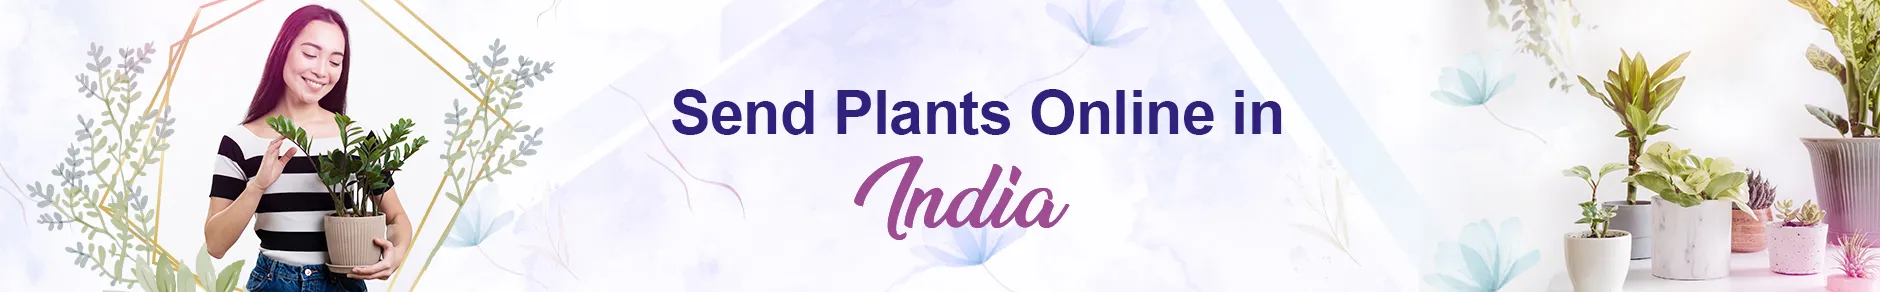 Plants - Online Plants Delivery in India